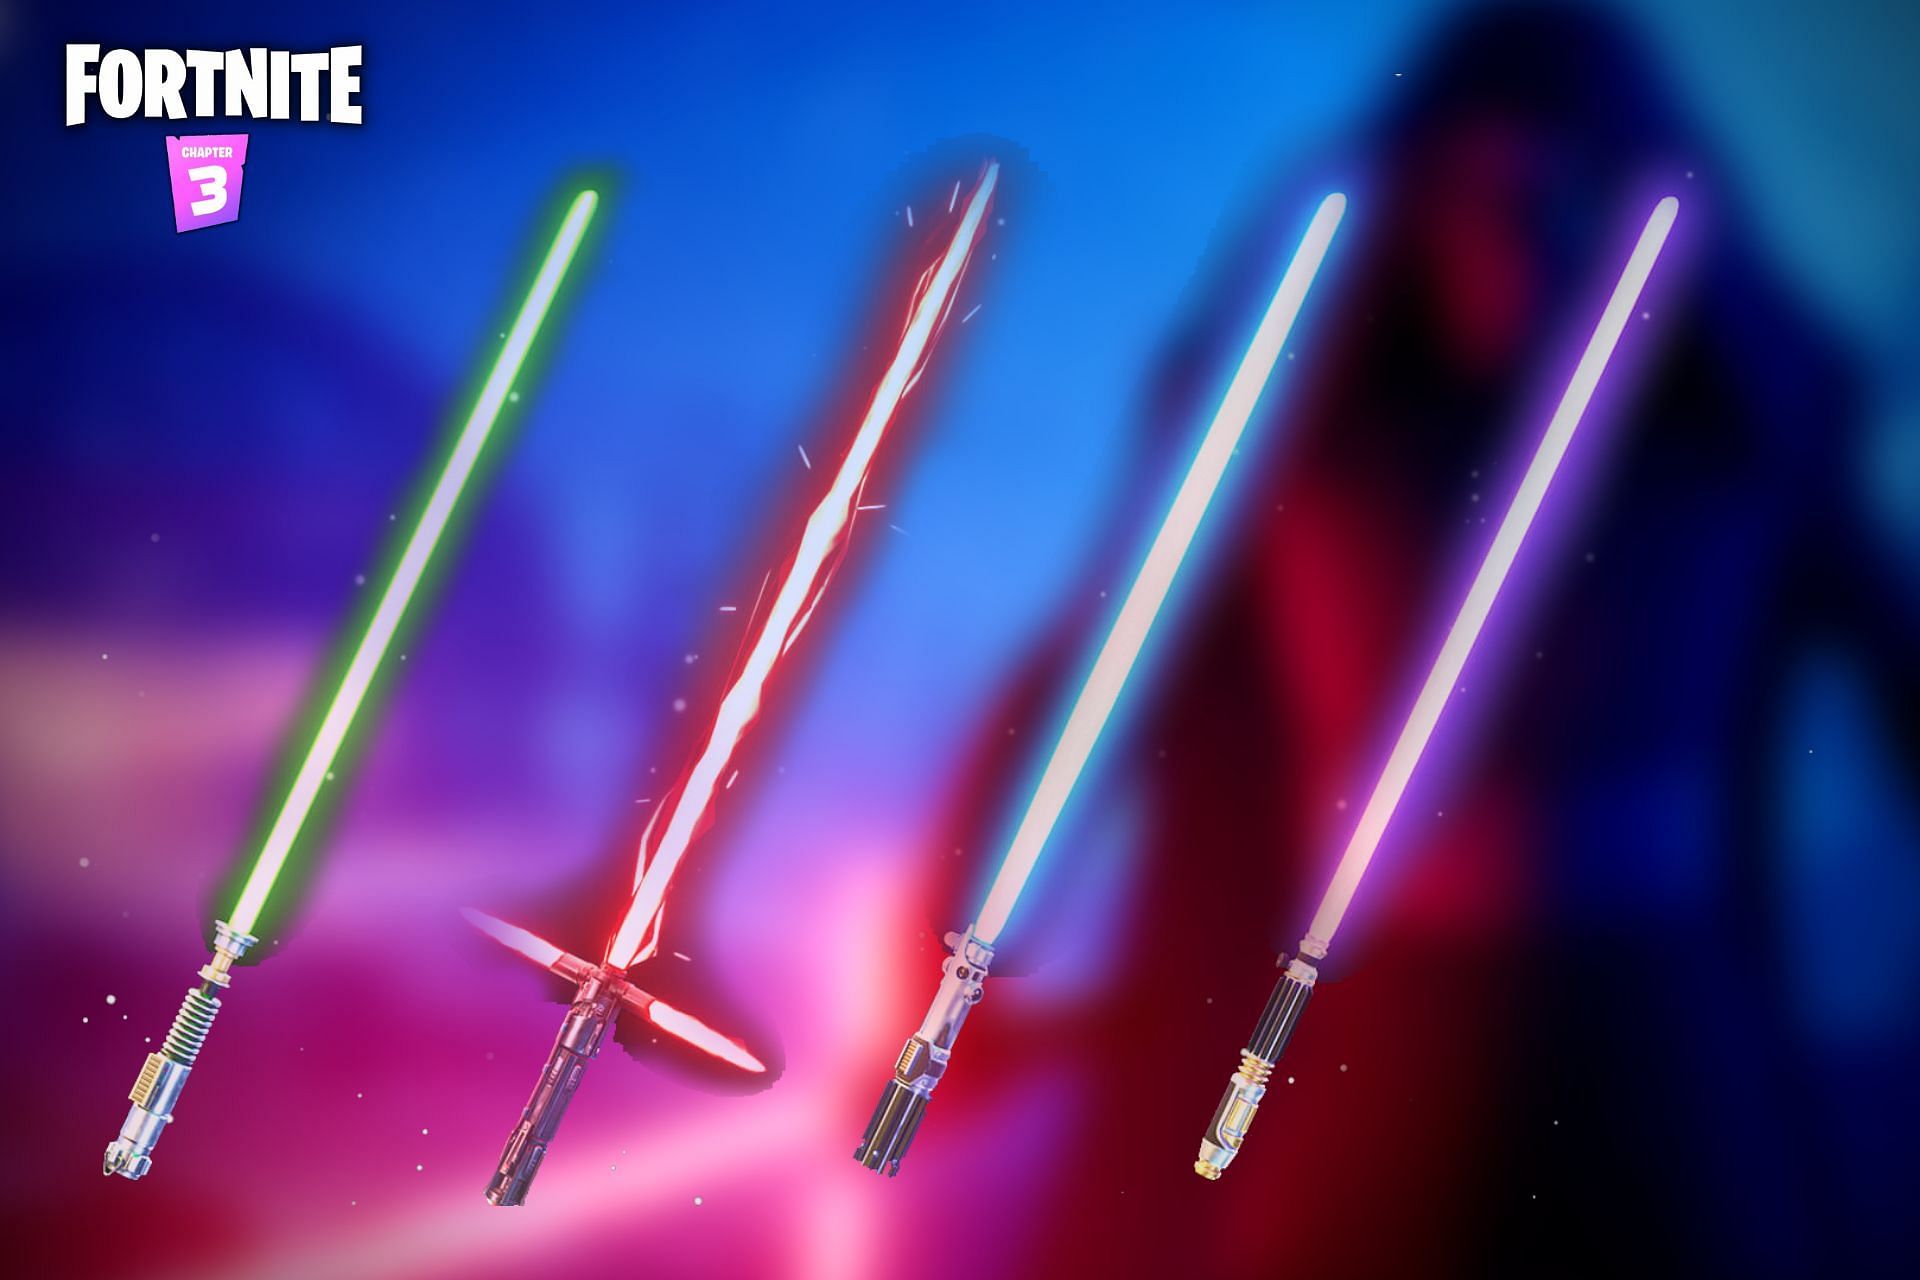 Lightsabers return date potentially uncovered in new Fortnite leak